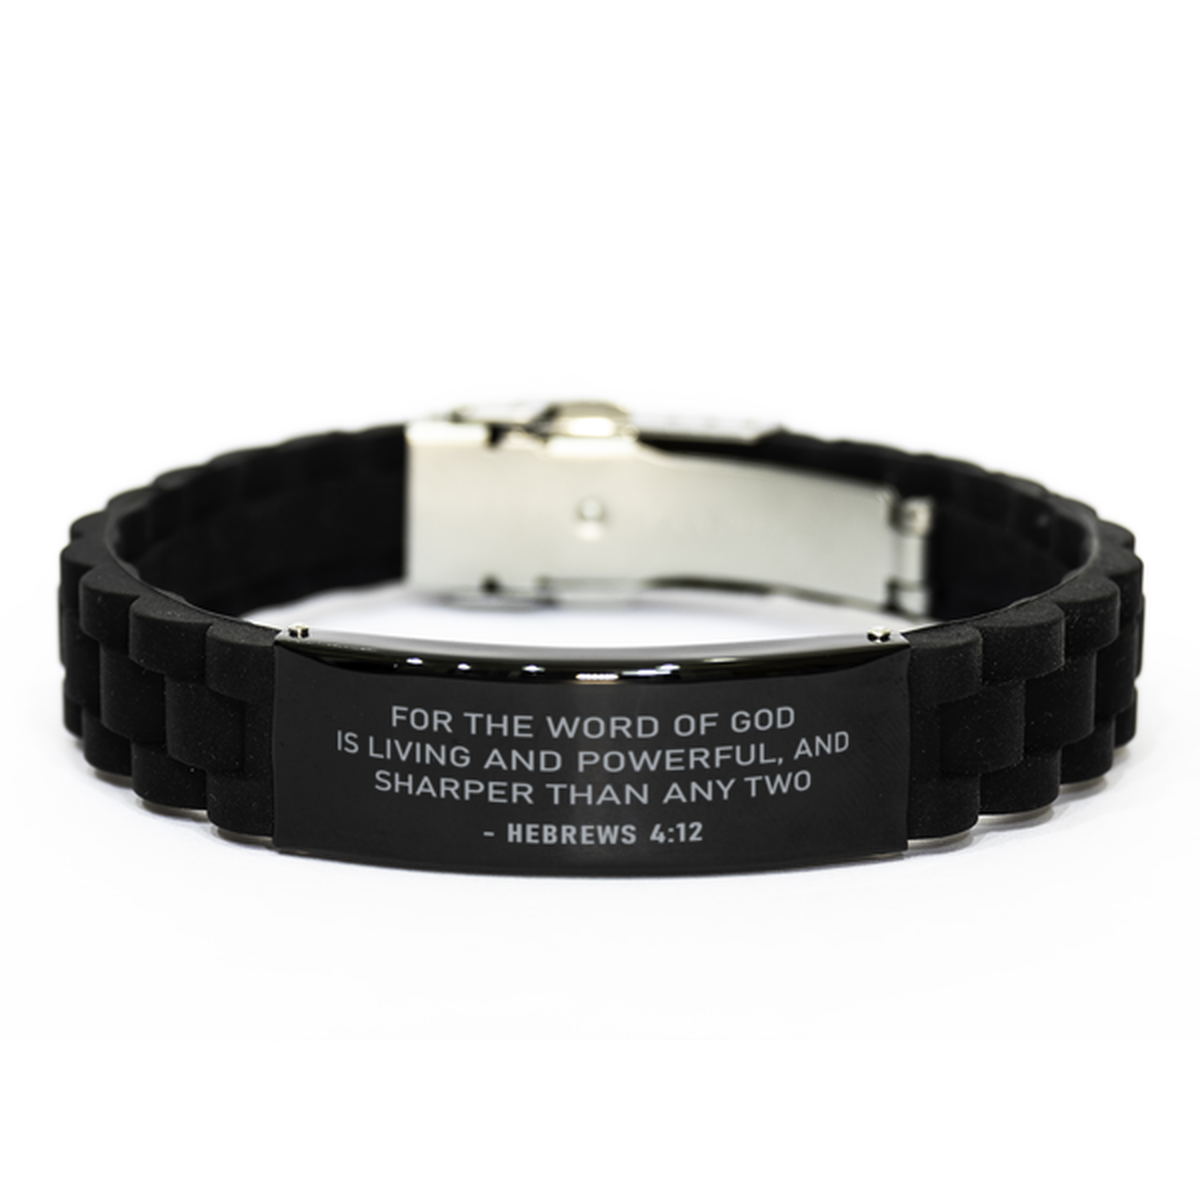 Bible Verse Black Bracelet,, Hebrews 4:12 For The Word Of God Is Living And Powerful, And, Inspirational Christian Gifts For Men Women